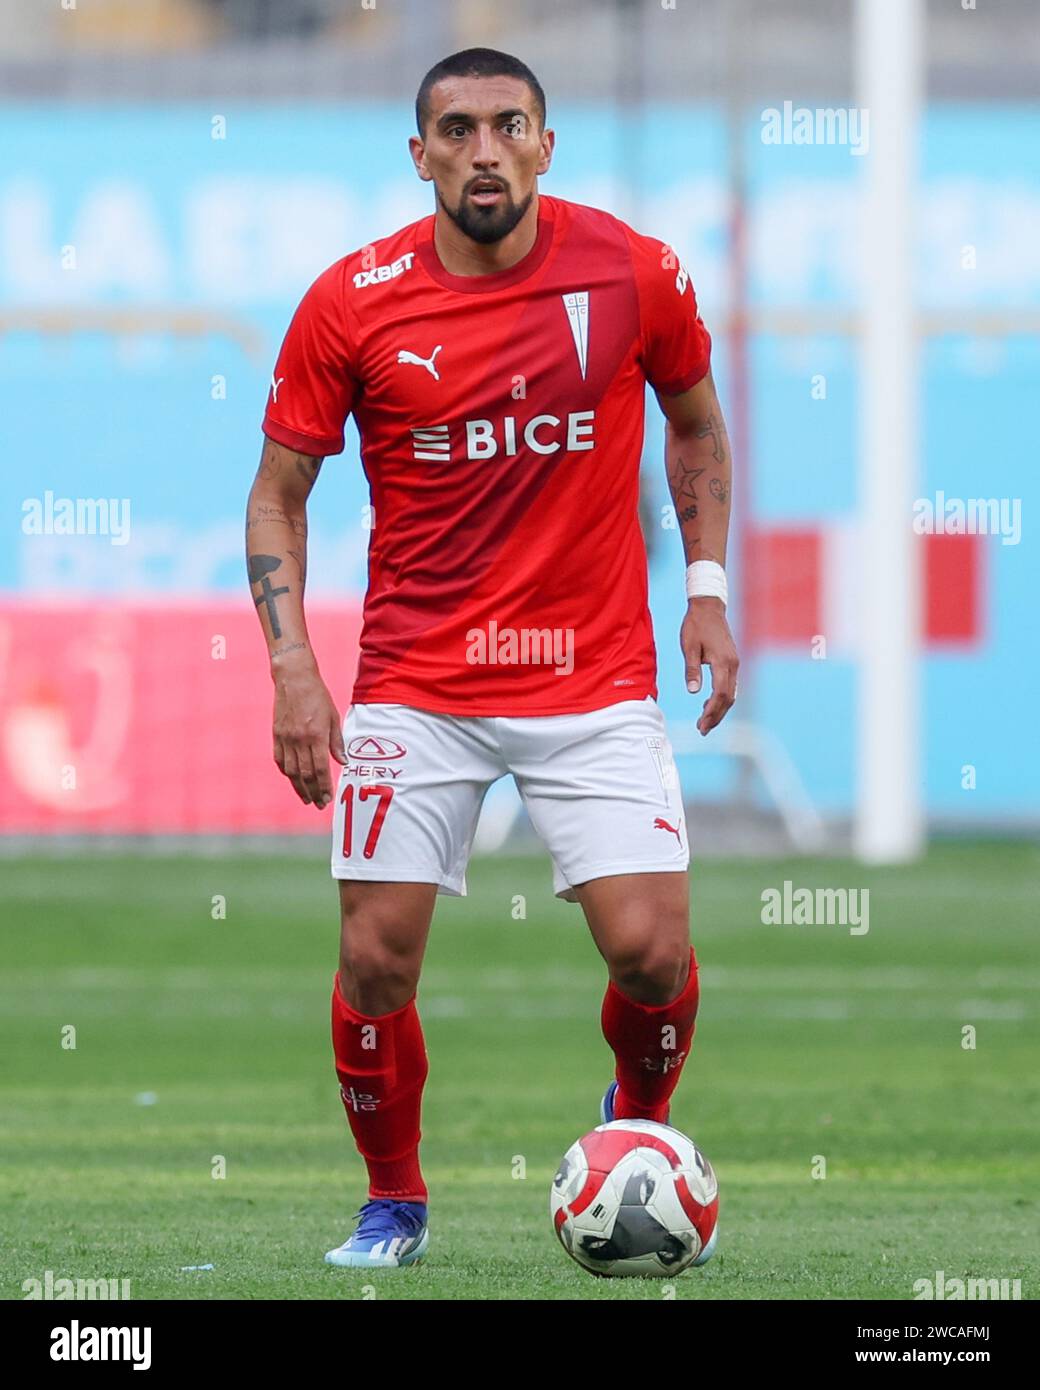 Lima, Peru. 14th Jan, 2024. Branco Ampuero of Universidad Catolica during the friendly match between Sporting Cristal and Universidad Catolica de Chile played at Nacional Stadium on January 14, 2024 in Lima, Peru. (Photo by Miguel Marrufo/PRESSINPHOTO) Credit: PRESSINPHOTO SPORTS AGENCY/Alamy Live News Stock Photo